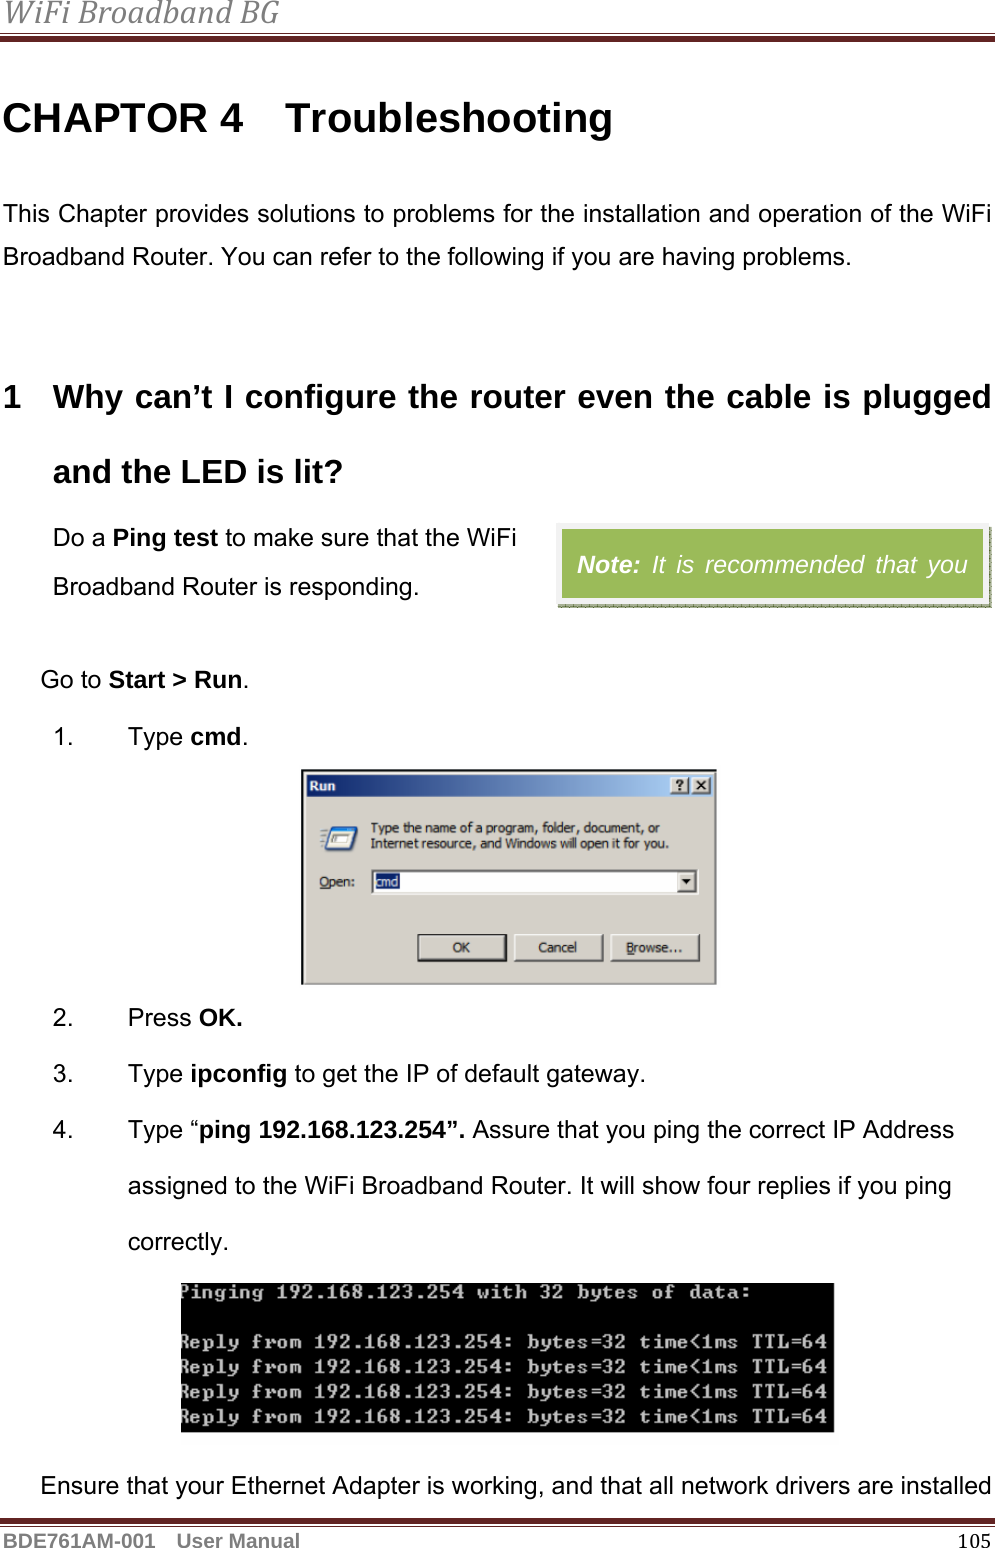 WiFiBroadbandBGBDE761AM-001  User Manual   105CHAPTOR 4  Troubleshooting This Chapter provides solutions to problems for the installation and operation of the WiFi Broadband Router. You can refer to the following if you are having problems.   1  Why can’t I configure the router even the cable is plugged and the LED is lit?  Do a Ping test to make sure that the WiFi   Broadband Router is responding.  Go to Start &gt; Run.  1. Type cmd.   2. Press OK. 3. Type ipconfig to get the IP of default gateway. 4. Type “ping 192.168.123.254”. Assure that you ping the correct IP Address assigned to the WiFi Broadband Router. It will show four replies if you ping correctly.  Ensure that your Ethernet Adapter is working, and that all network drivers are installed Note: It is recommended that you 